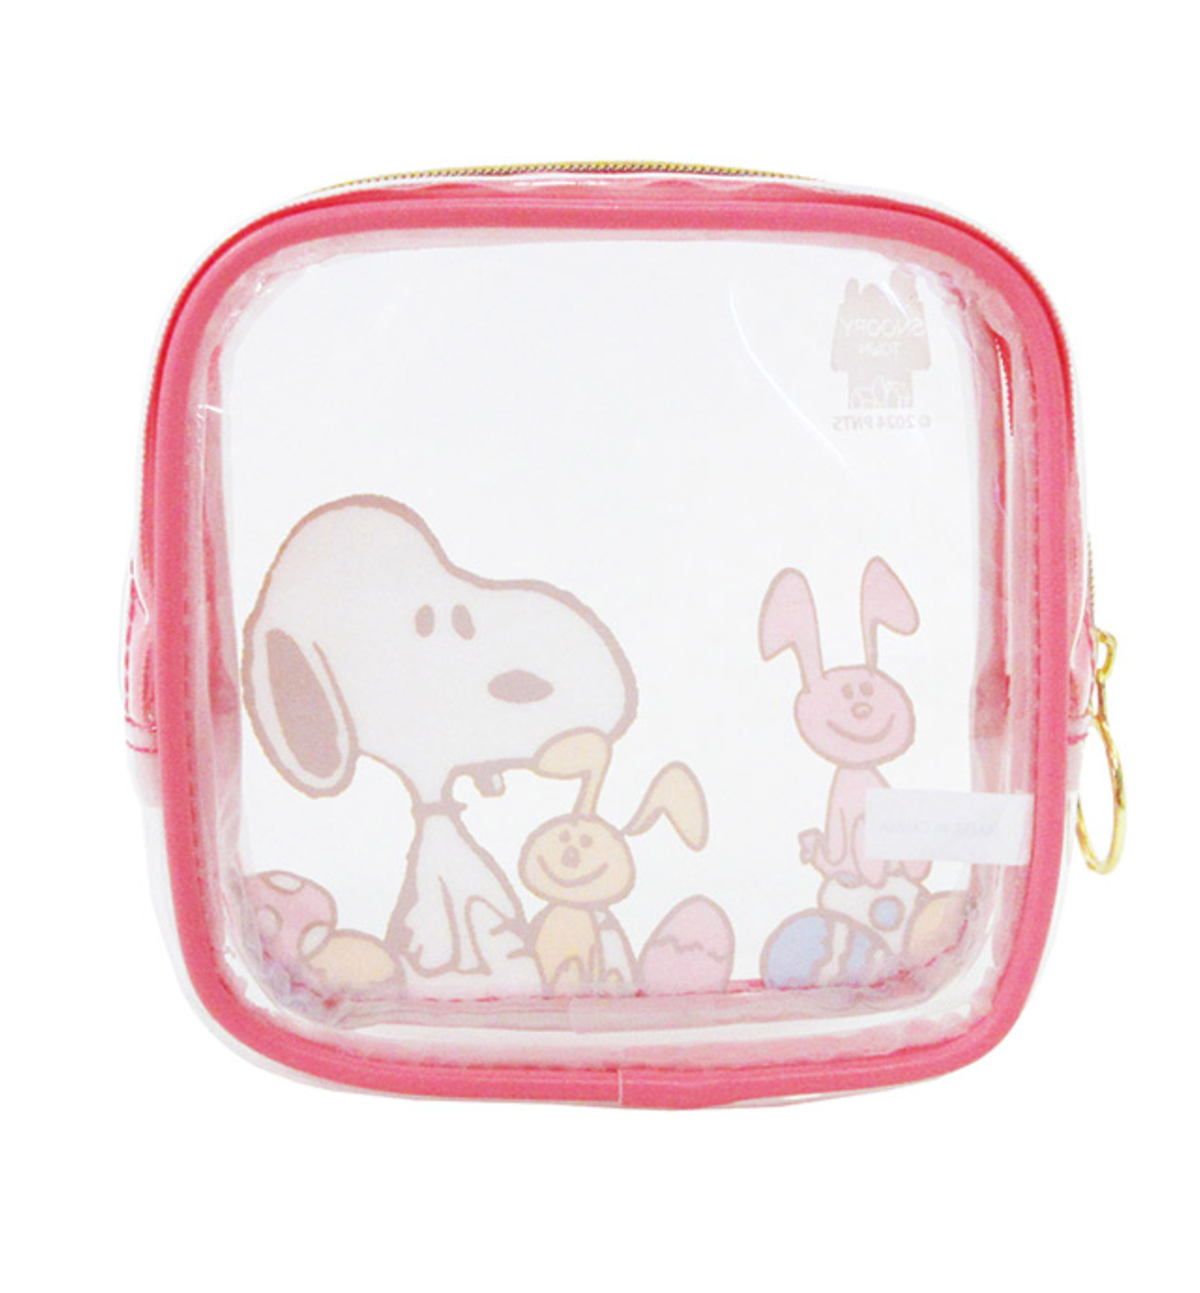 Peanuts Snoopy Clear Pouch (Fun Easter Egg Game)